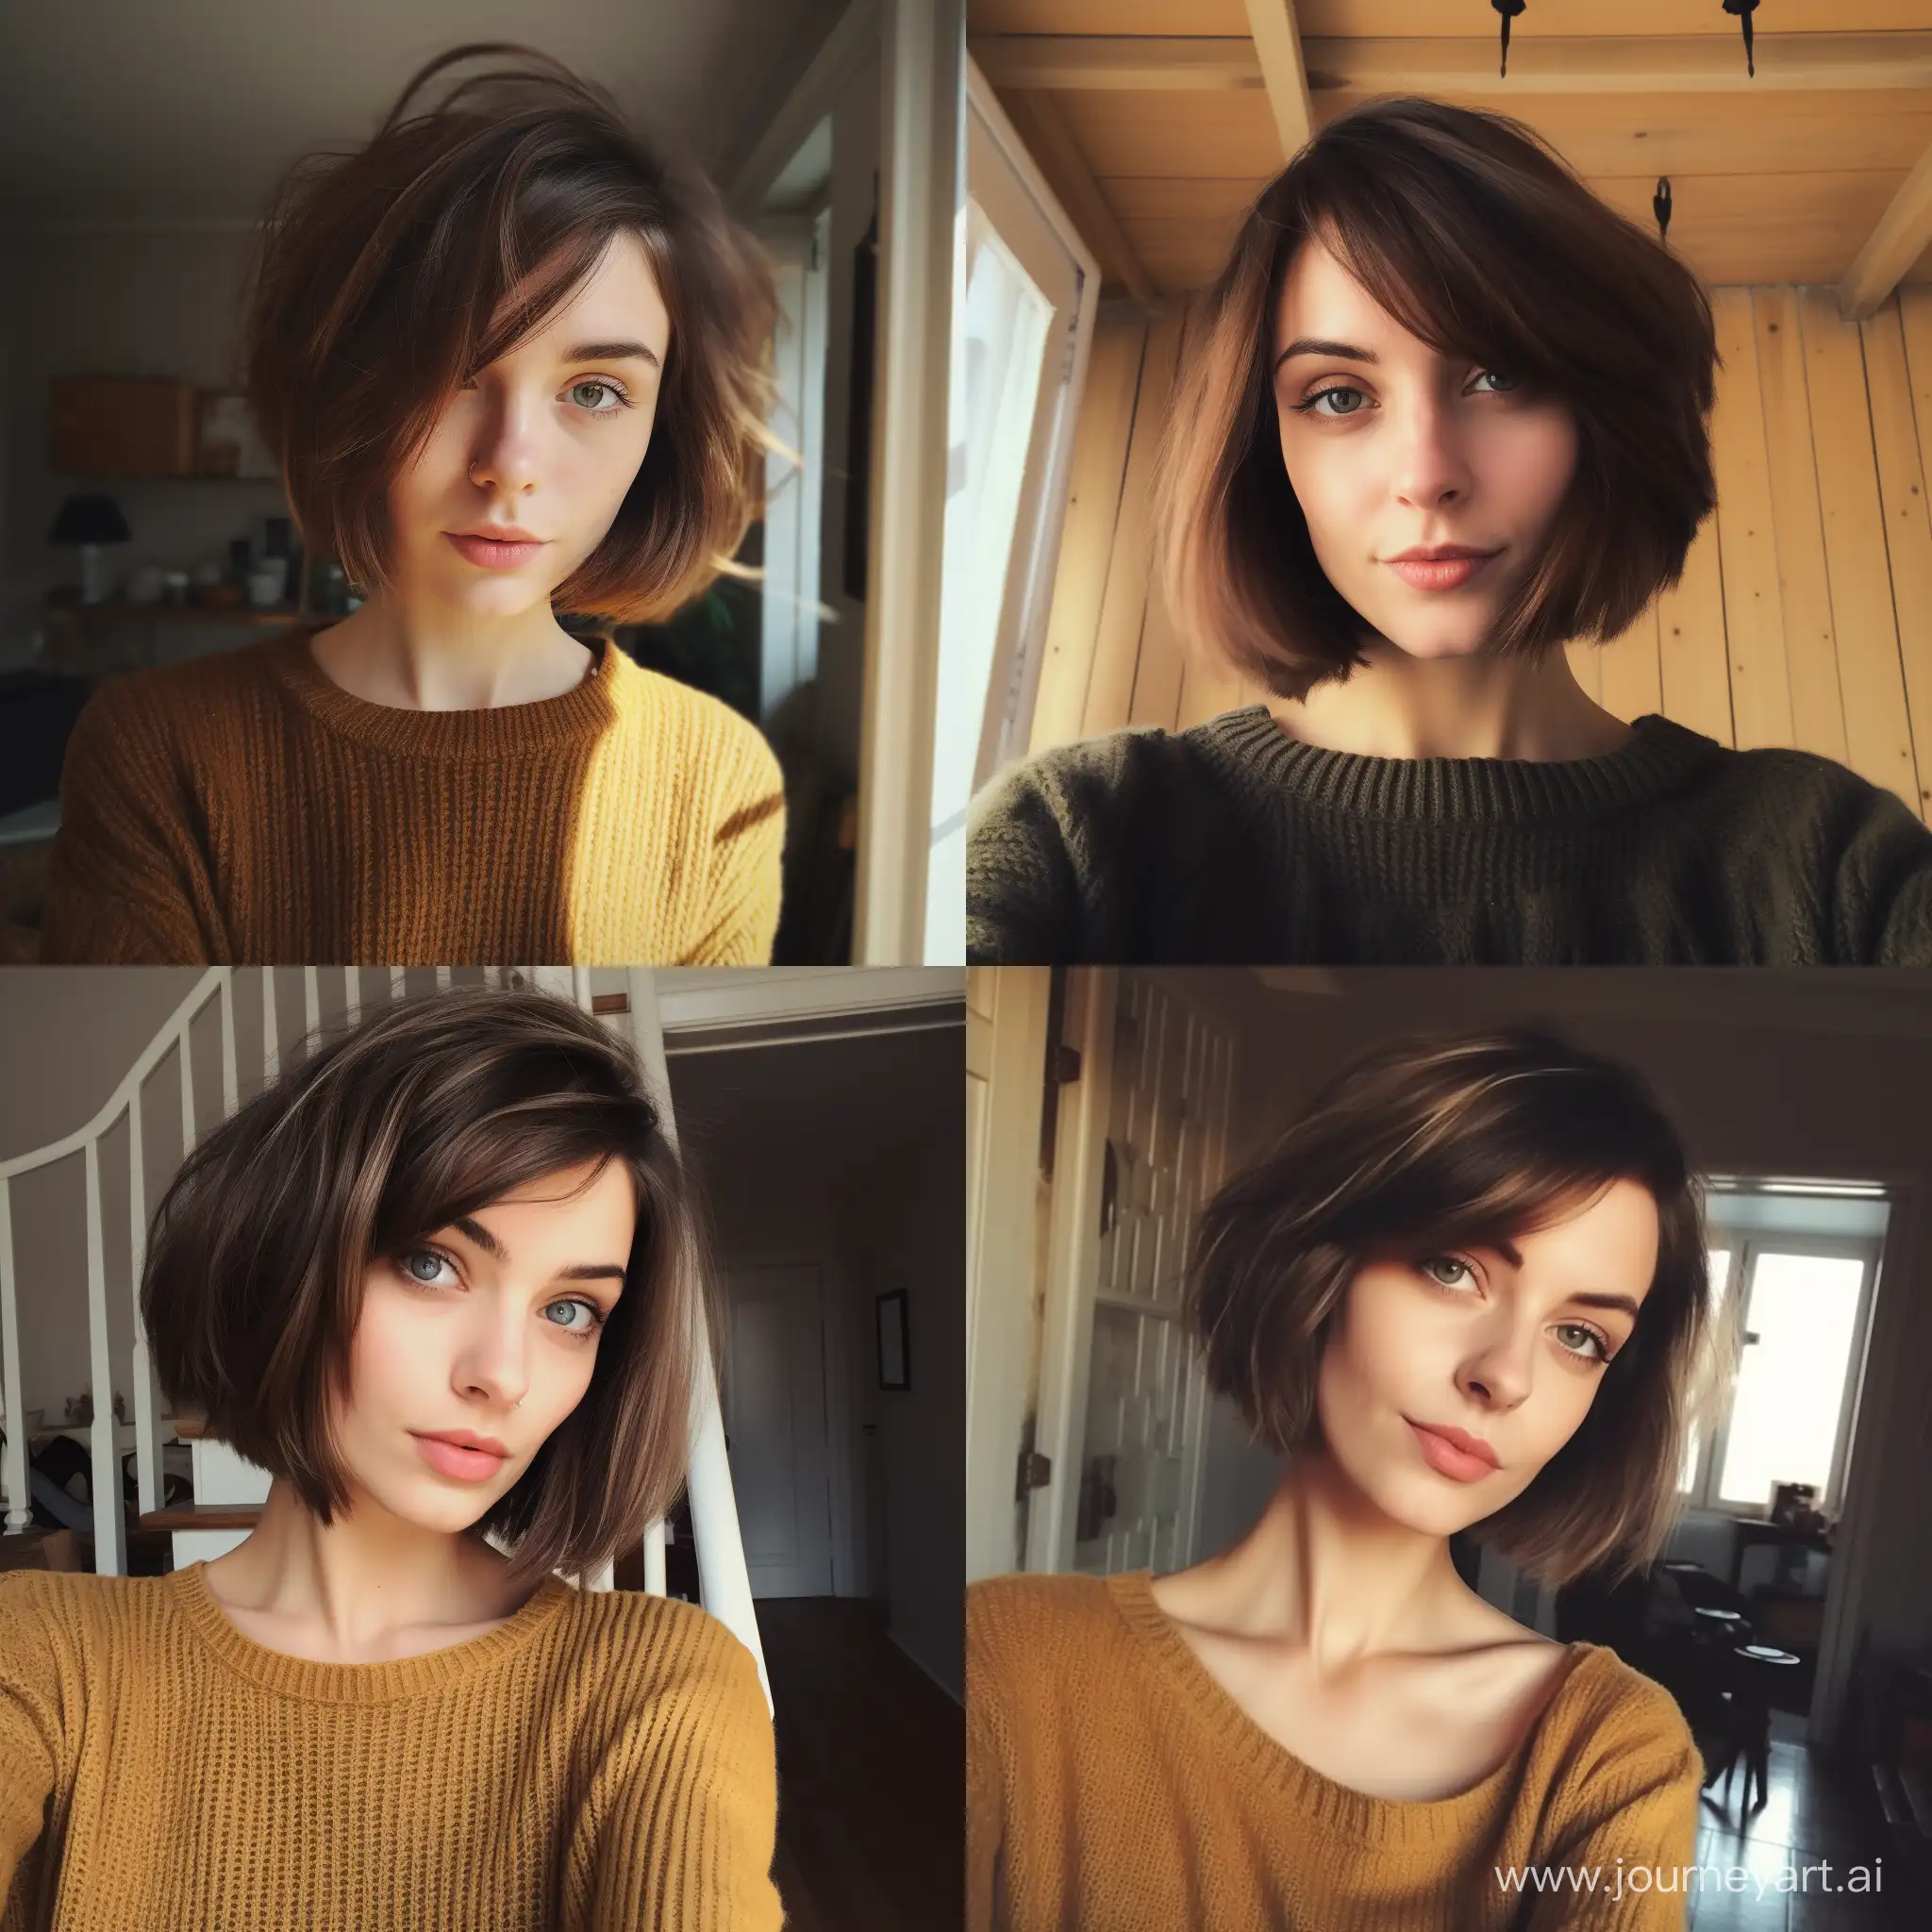 Casual-Selfie-of-Woman-with-Brown-Bob-Hairstyle-and-Yellowish-Eyes